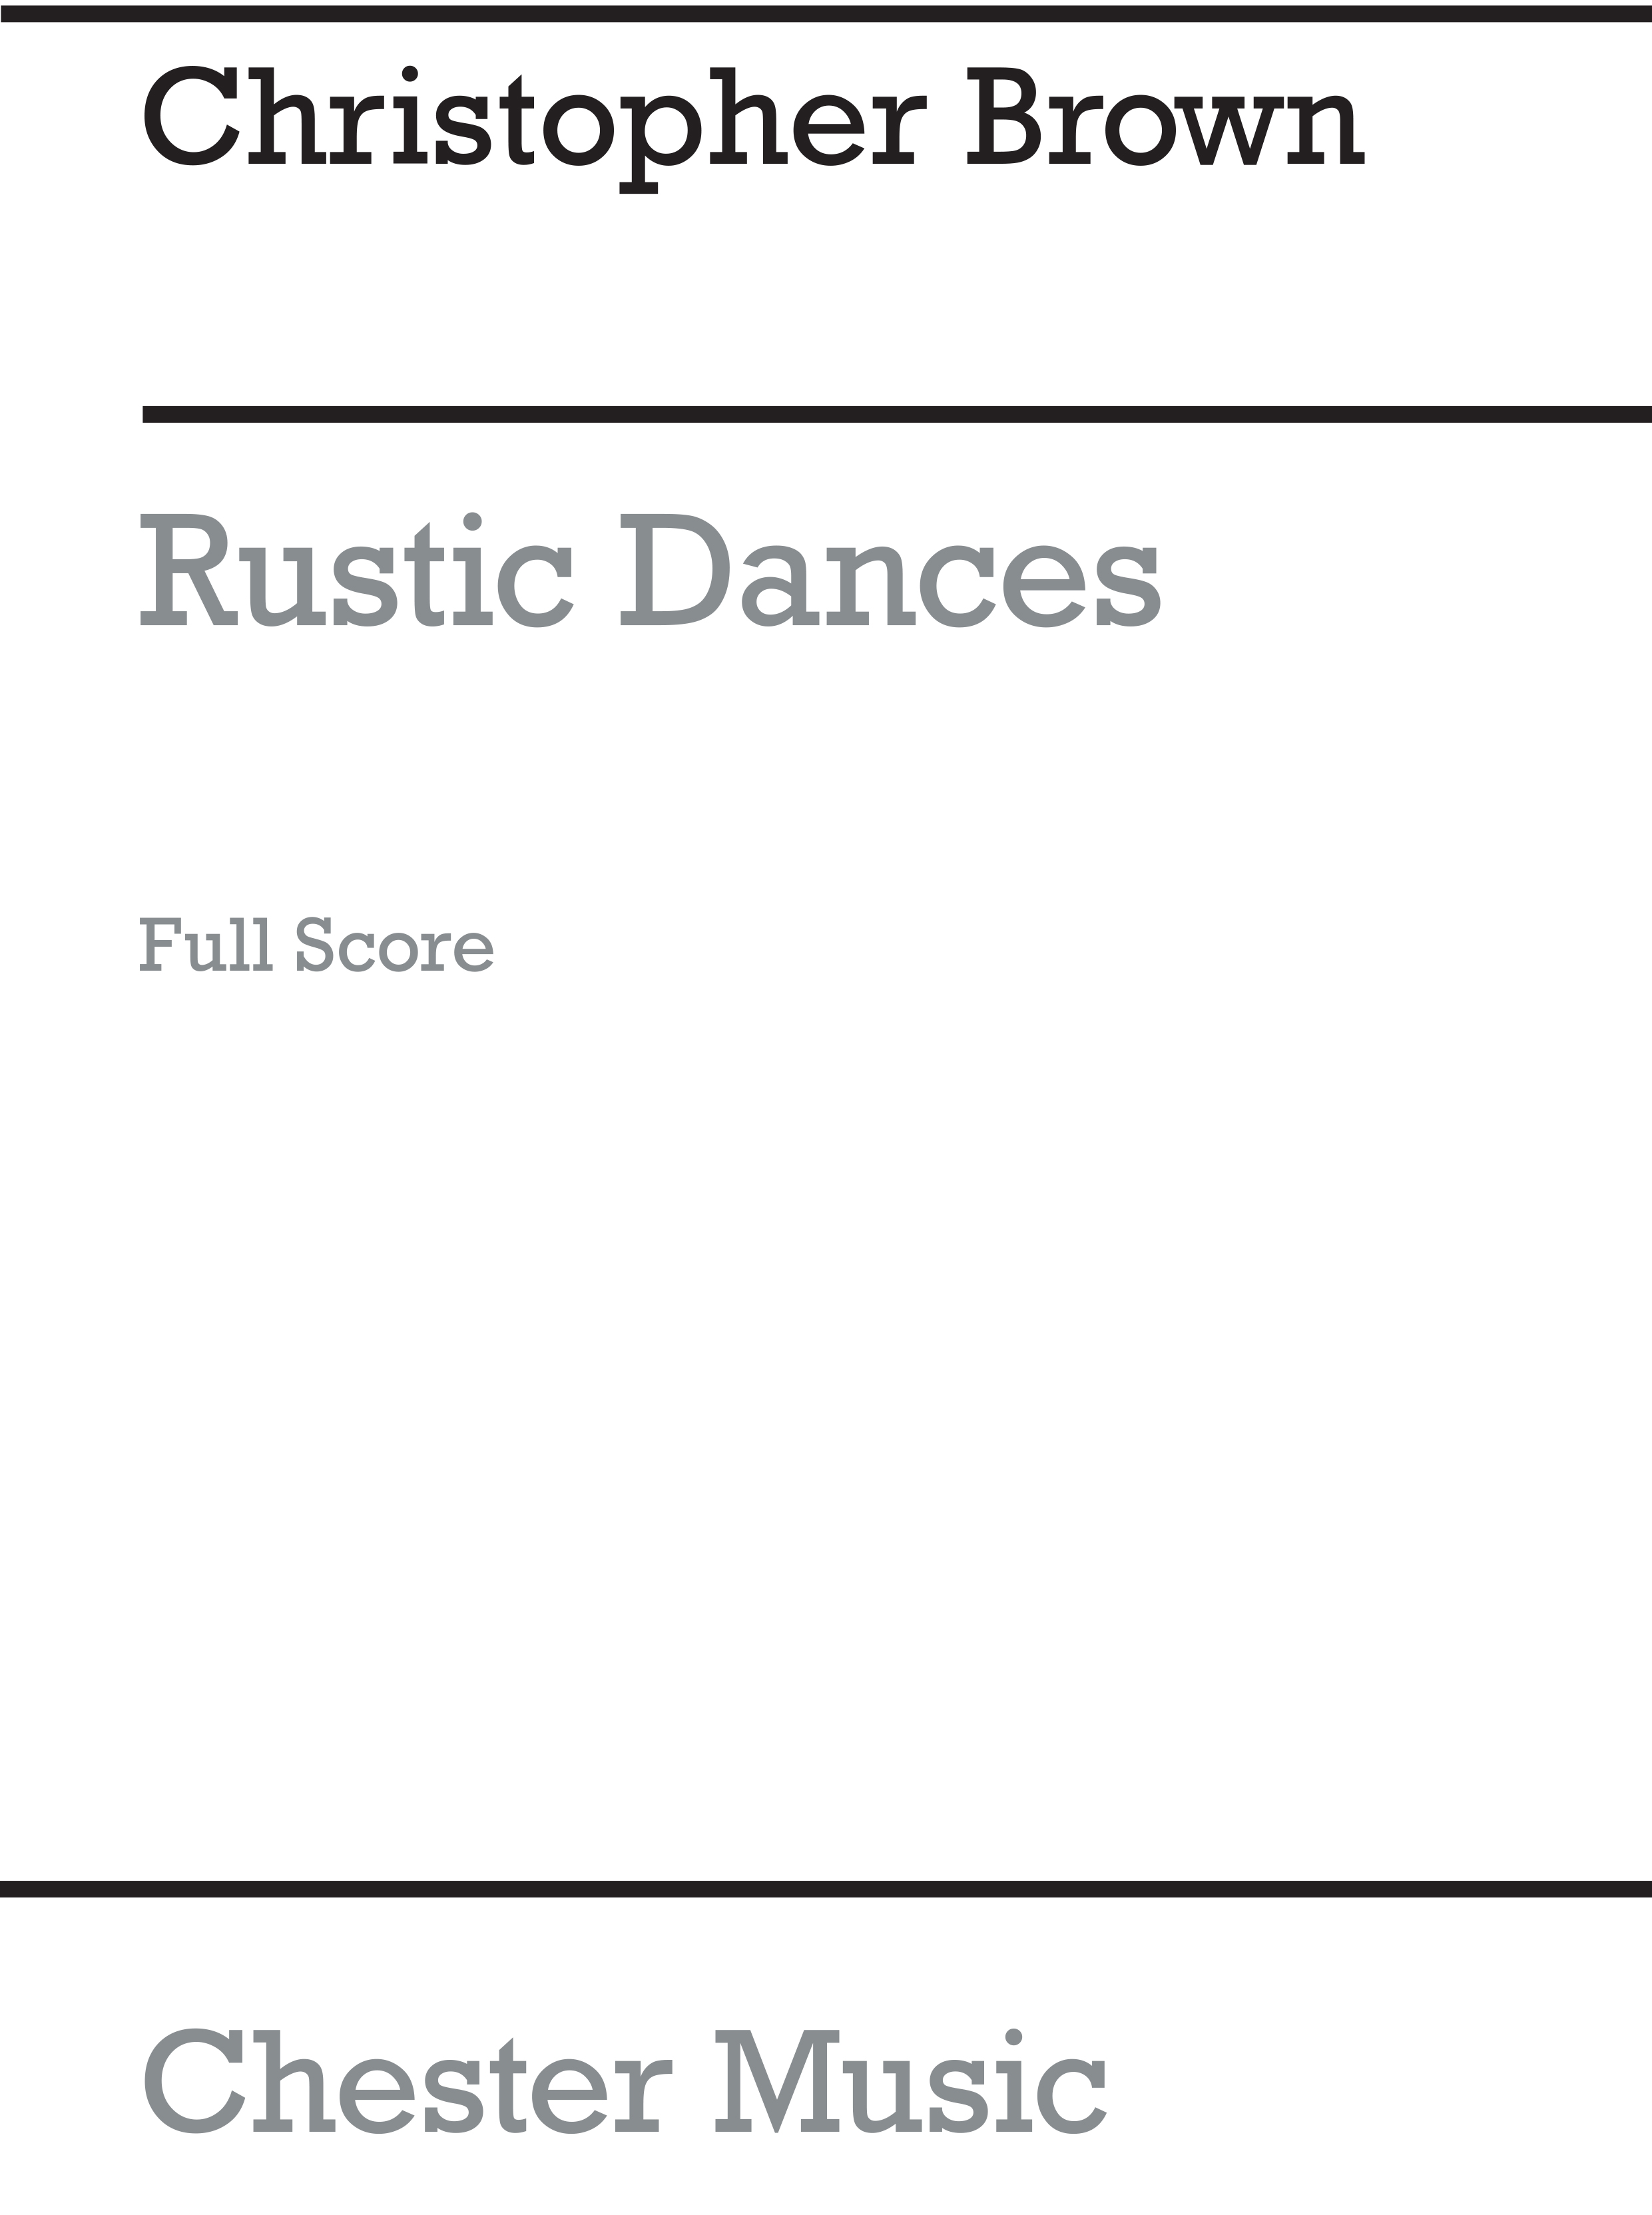 Christopher Brown: Playstrings Moderately Easy No. 10 Rustic Dances: Orchestra: